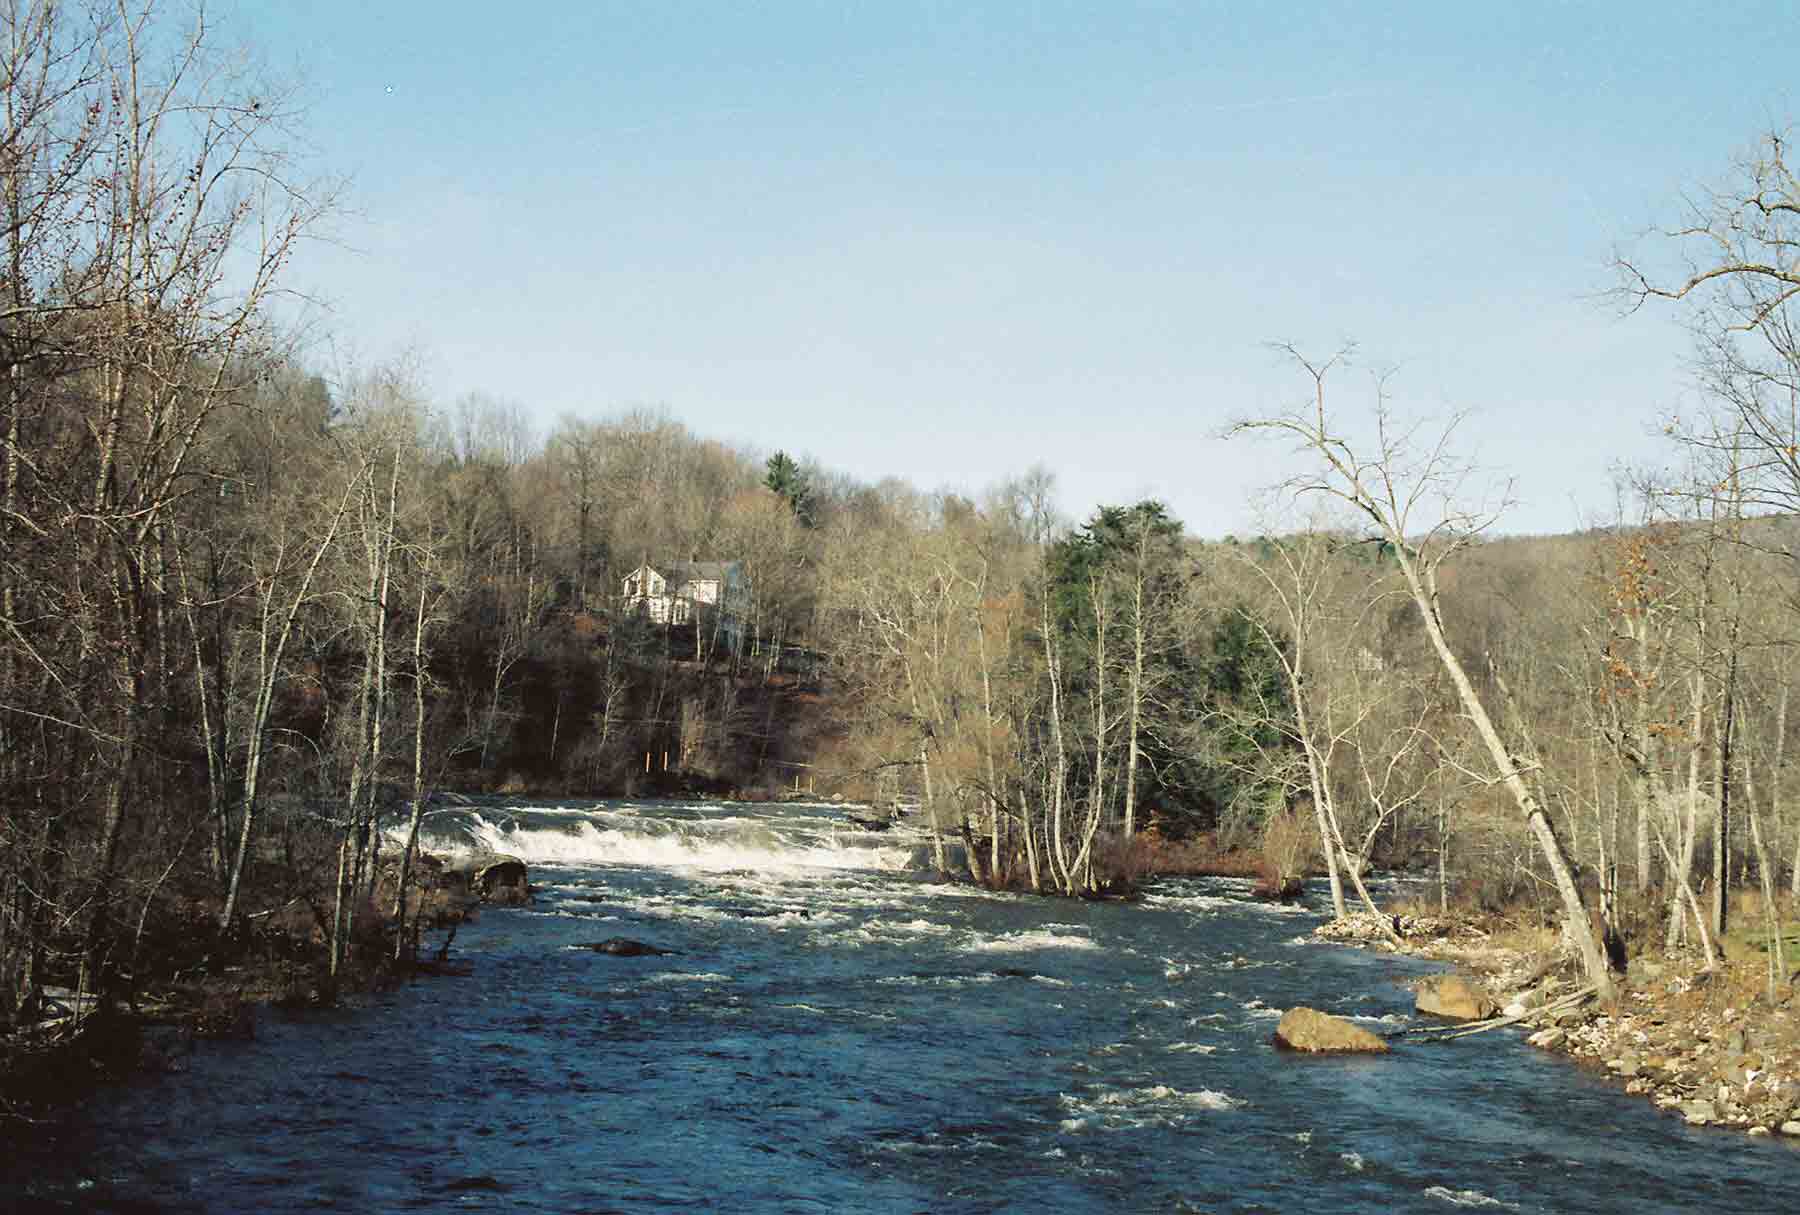 mm 8.2 - The Housatonic River near the Great Falls. Picture taken from the Iron Bridge. Courtesy dlcul@conncoll.edu